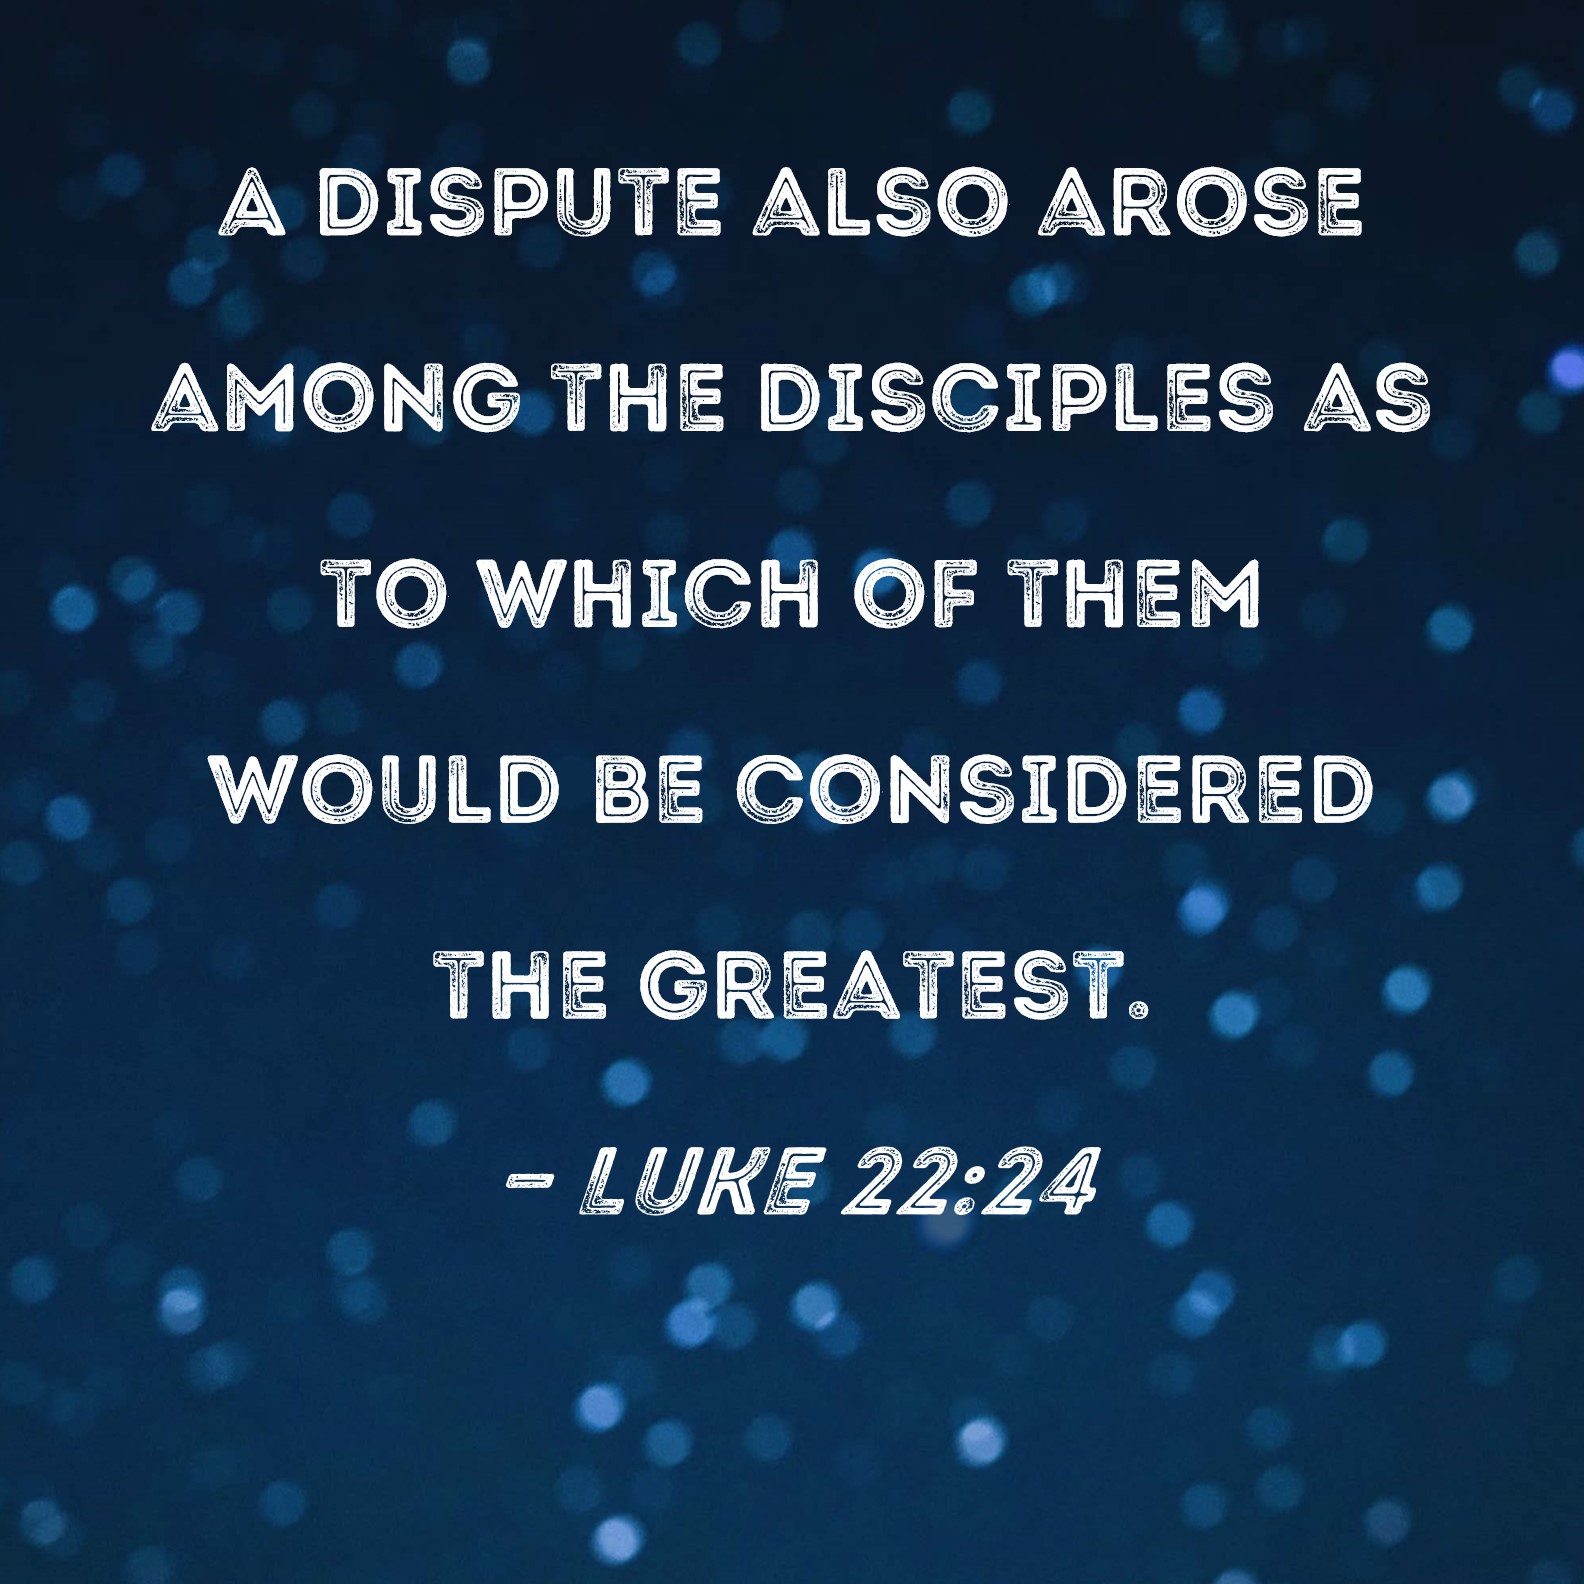 Luke 22:24 A dispute also arose among the disciples as to which of them ...